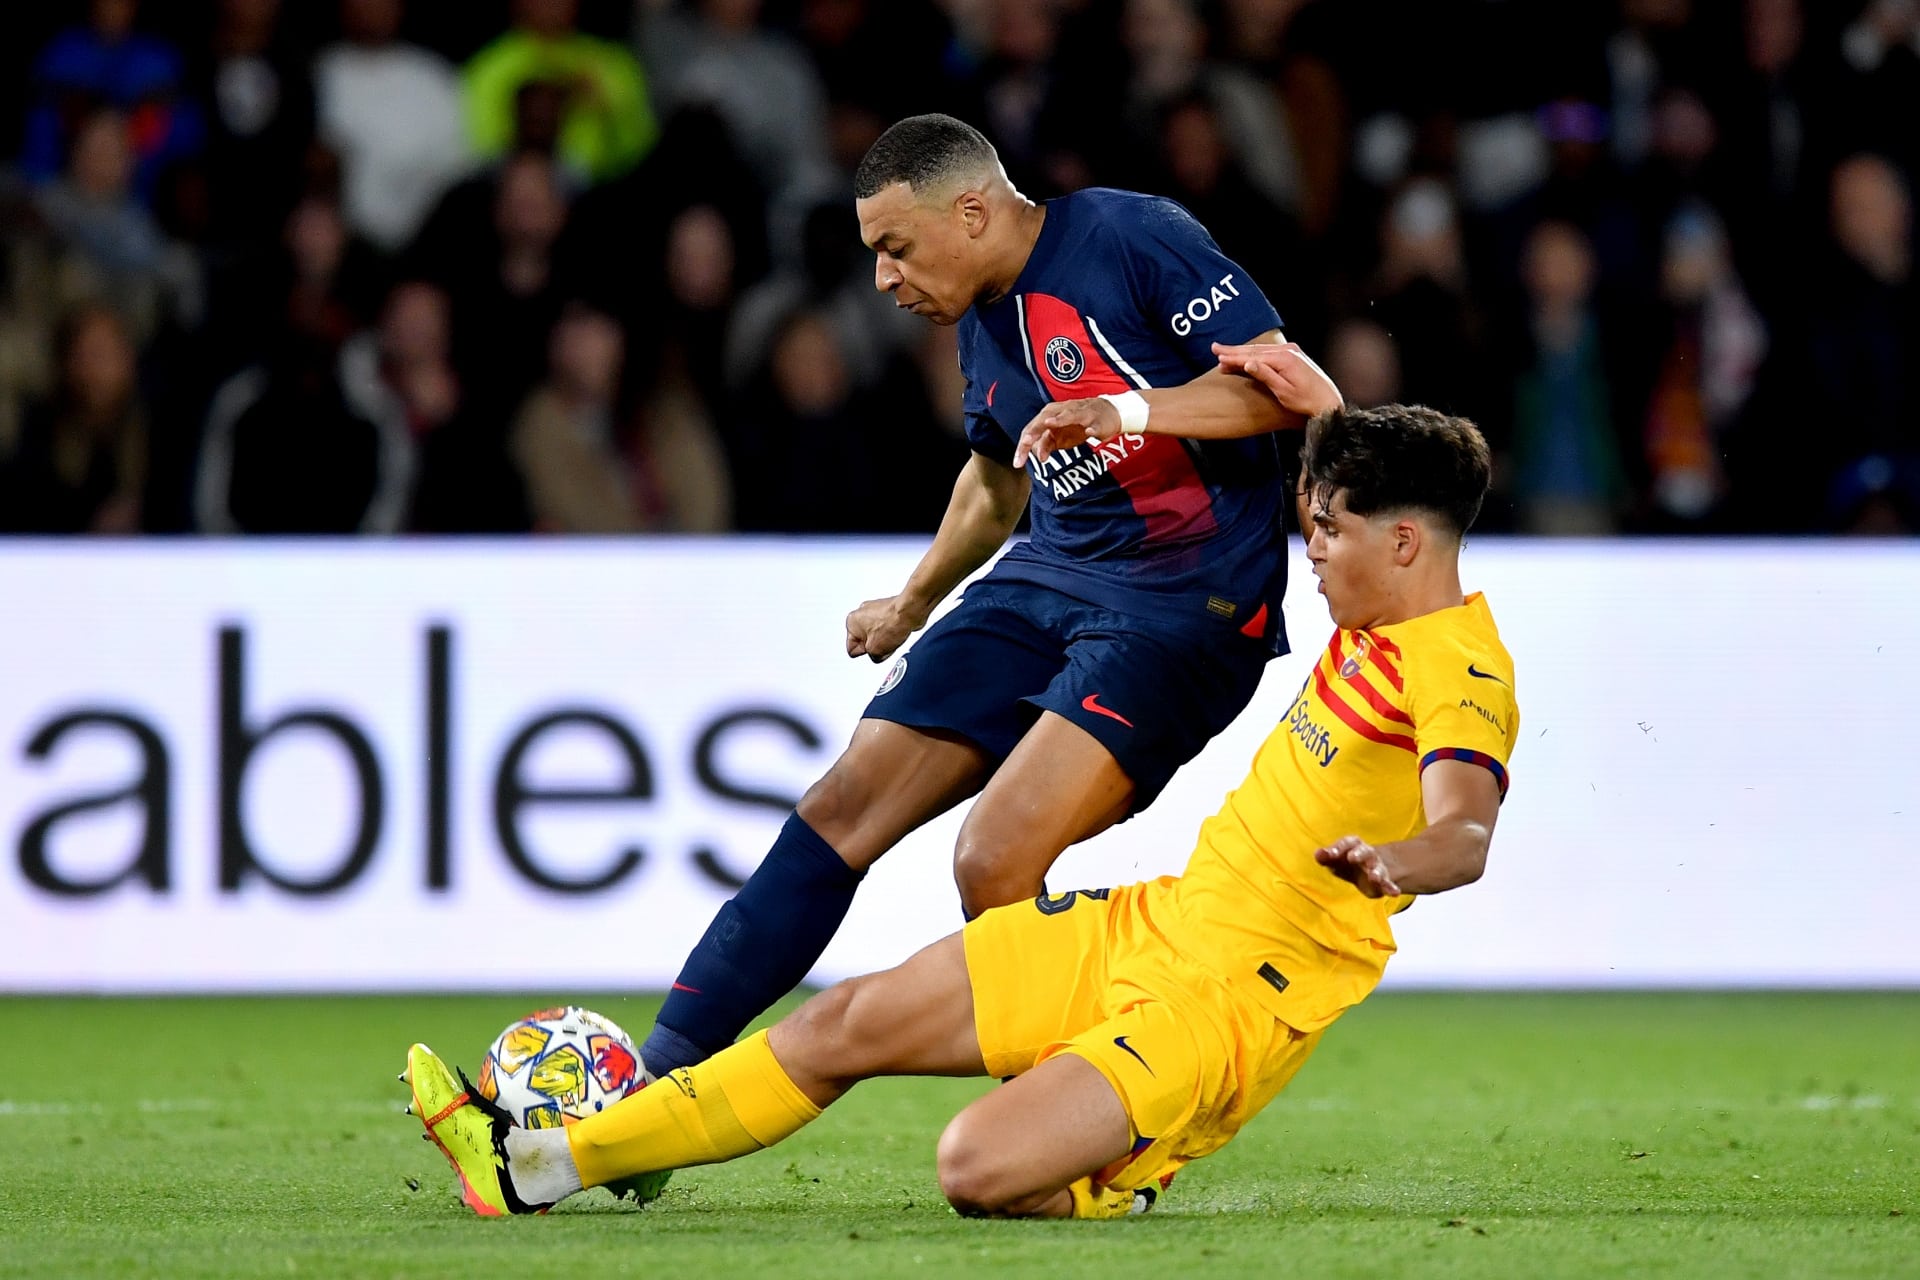 Barcelona's Champions League dream ends with 10-man collapse against PSG